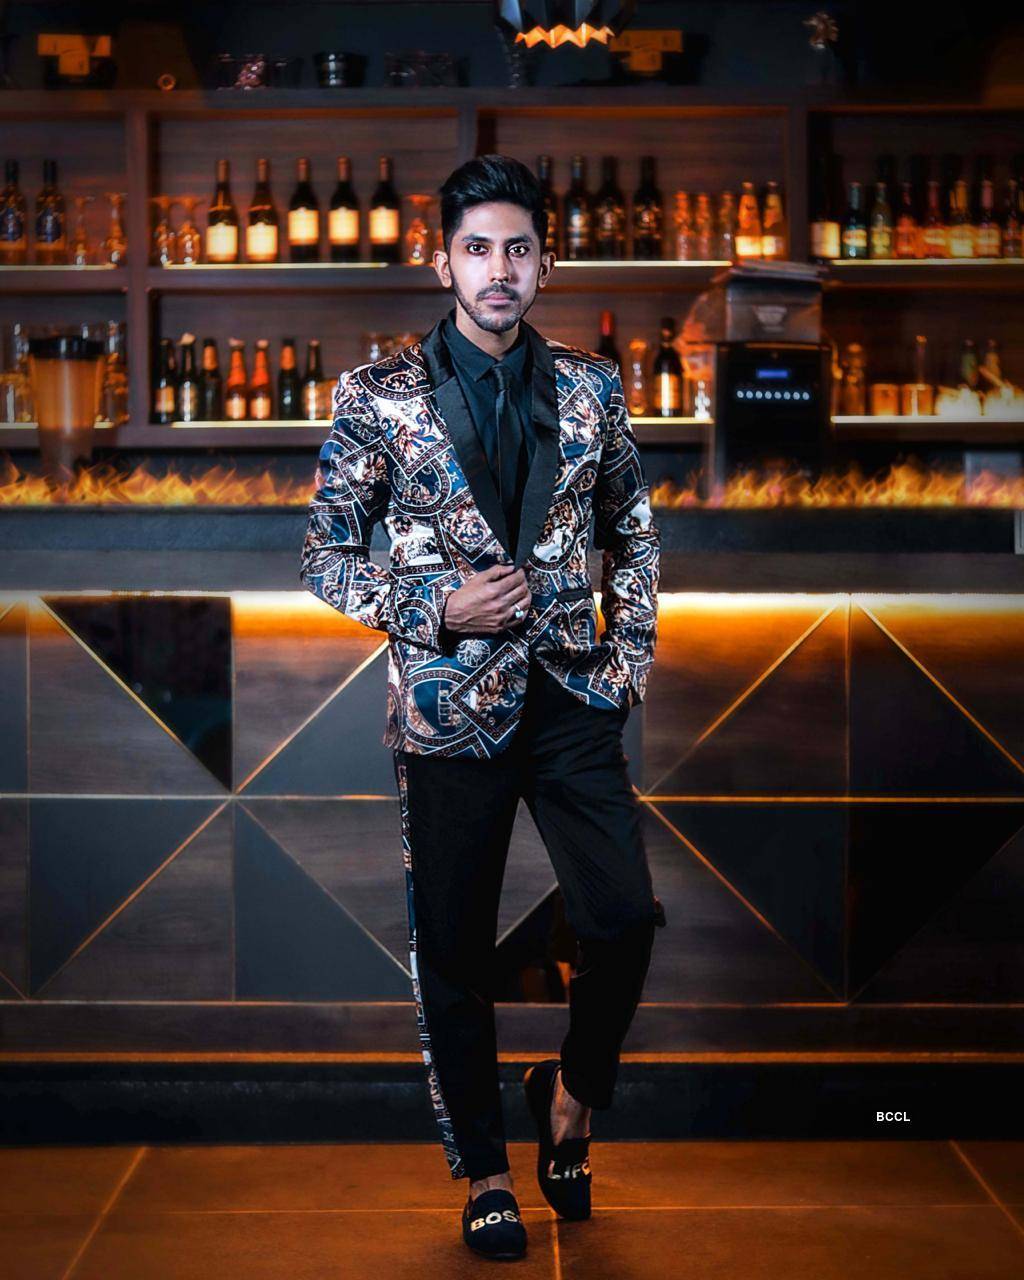 TV actor Kuldeep Singhania looks classy and suave in his latest photoshoots